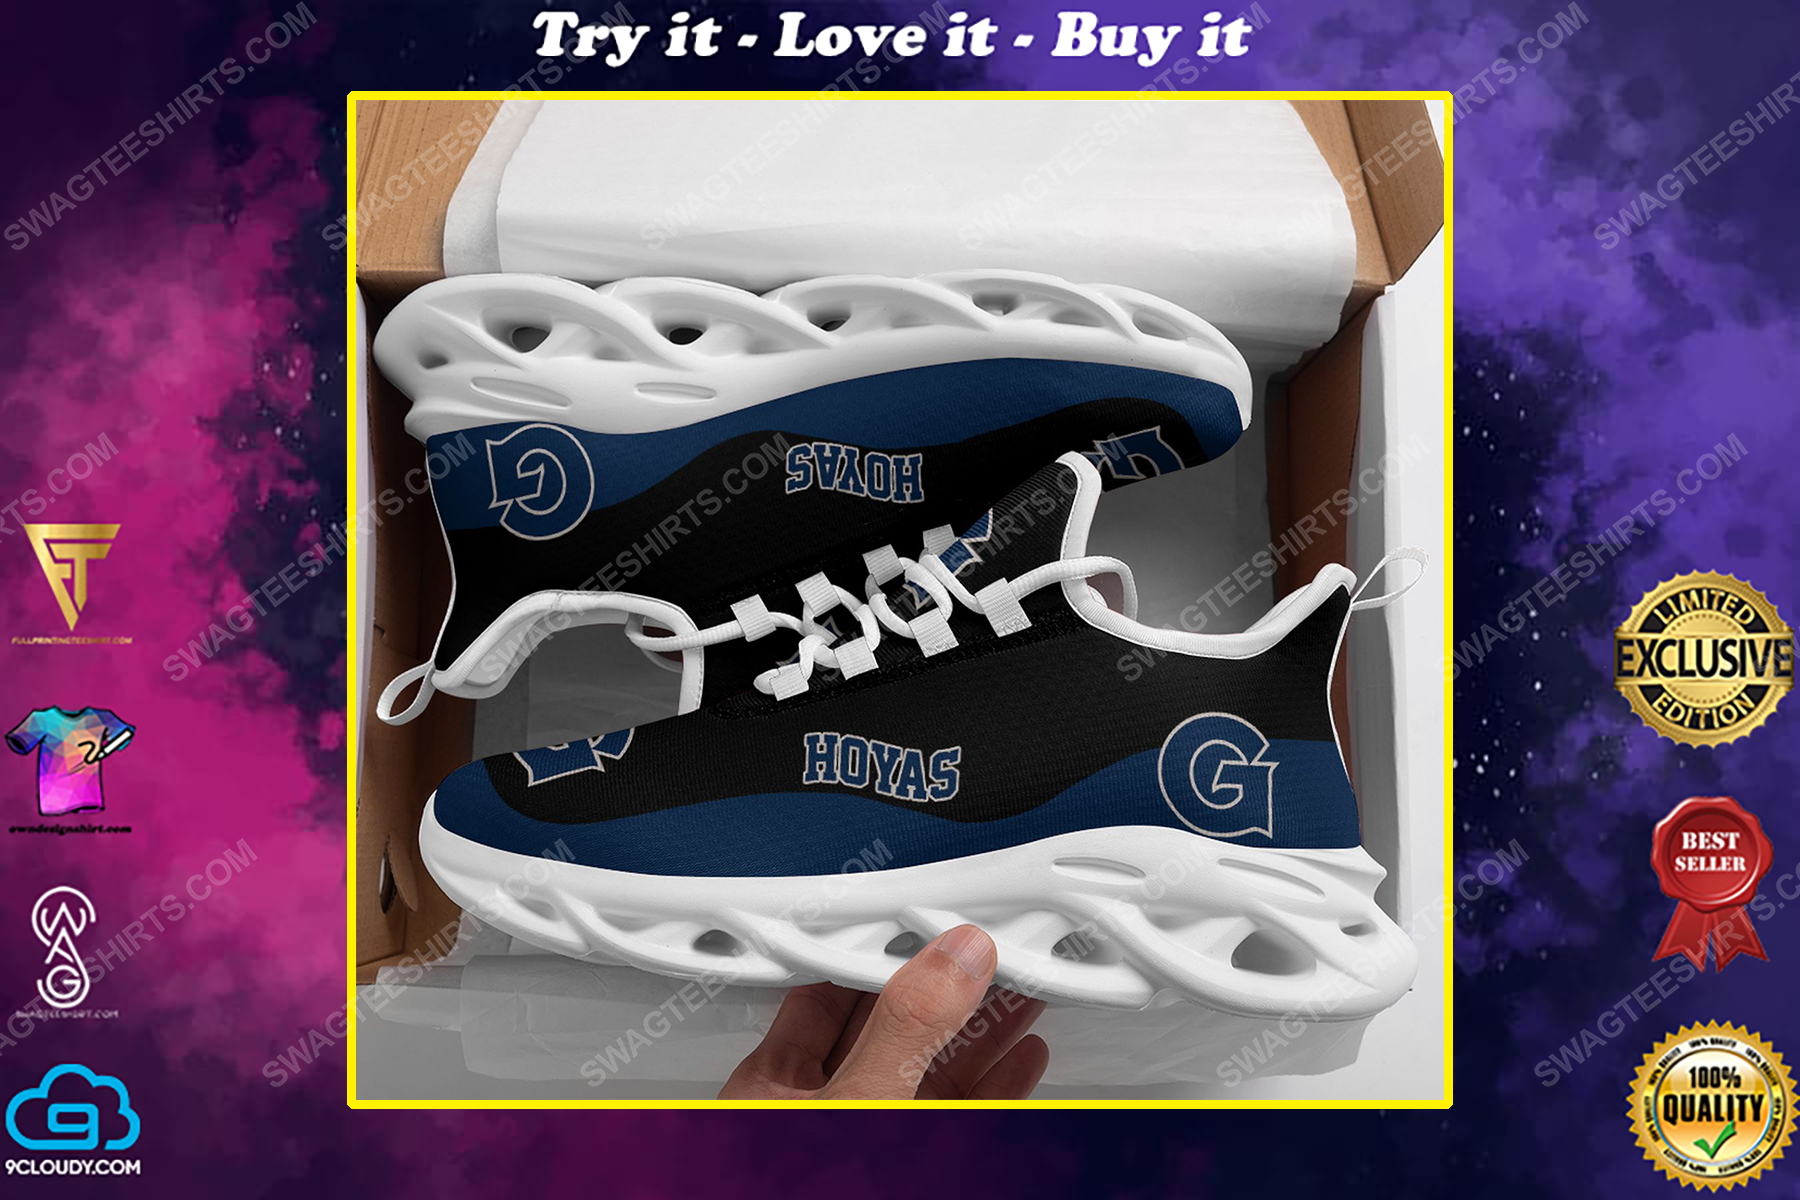 The georgetown hoyas football team max soul shoes